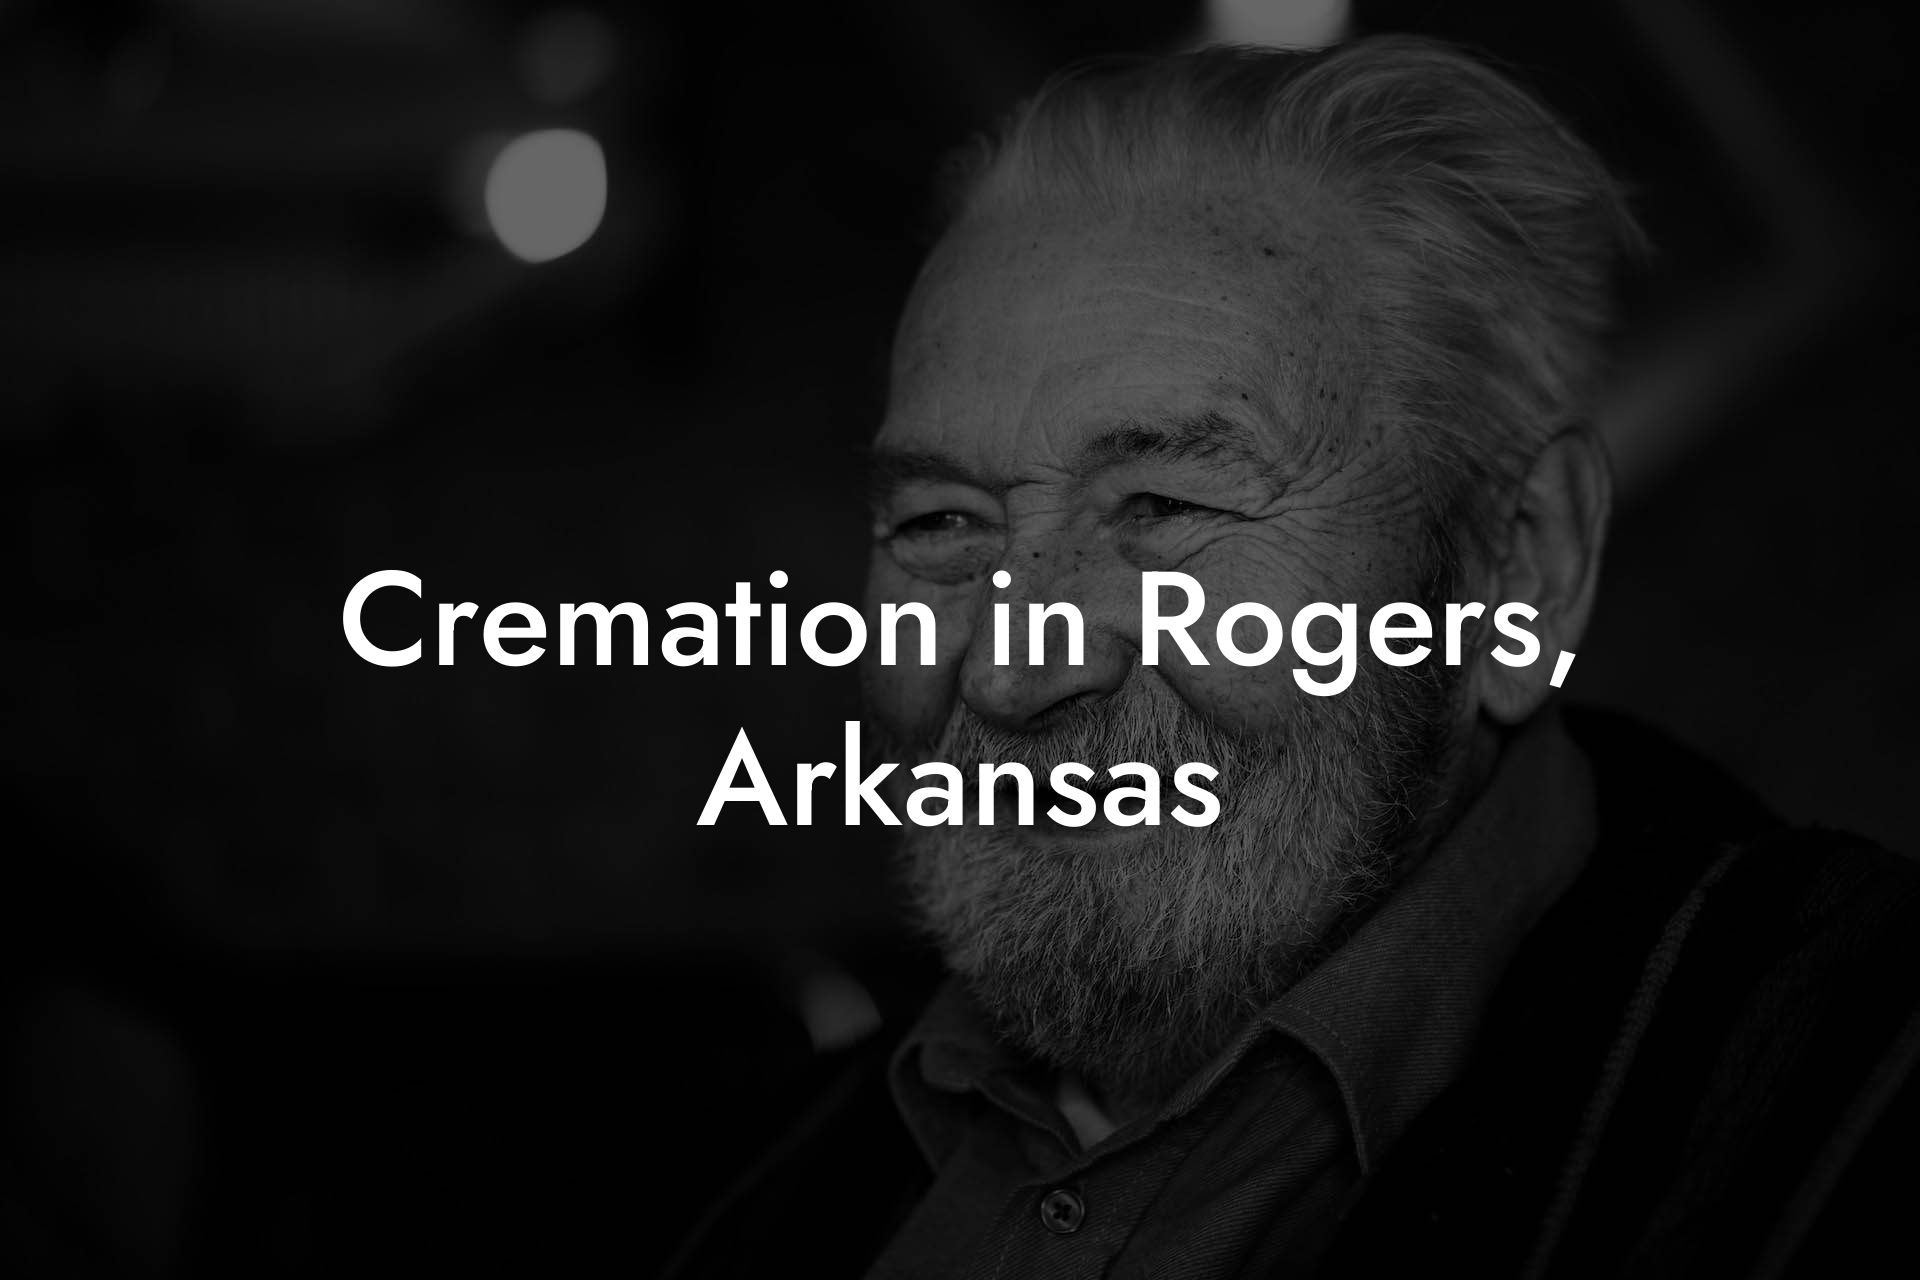 Cremation in Rogers, Arkansas